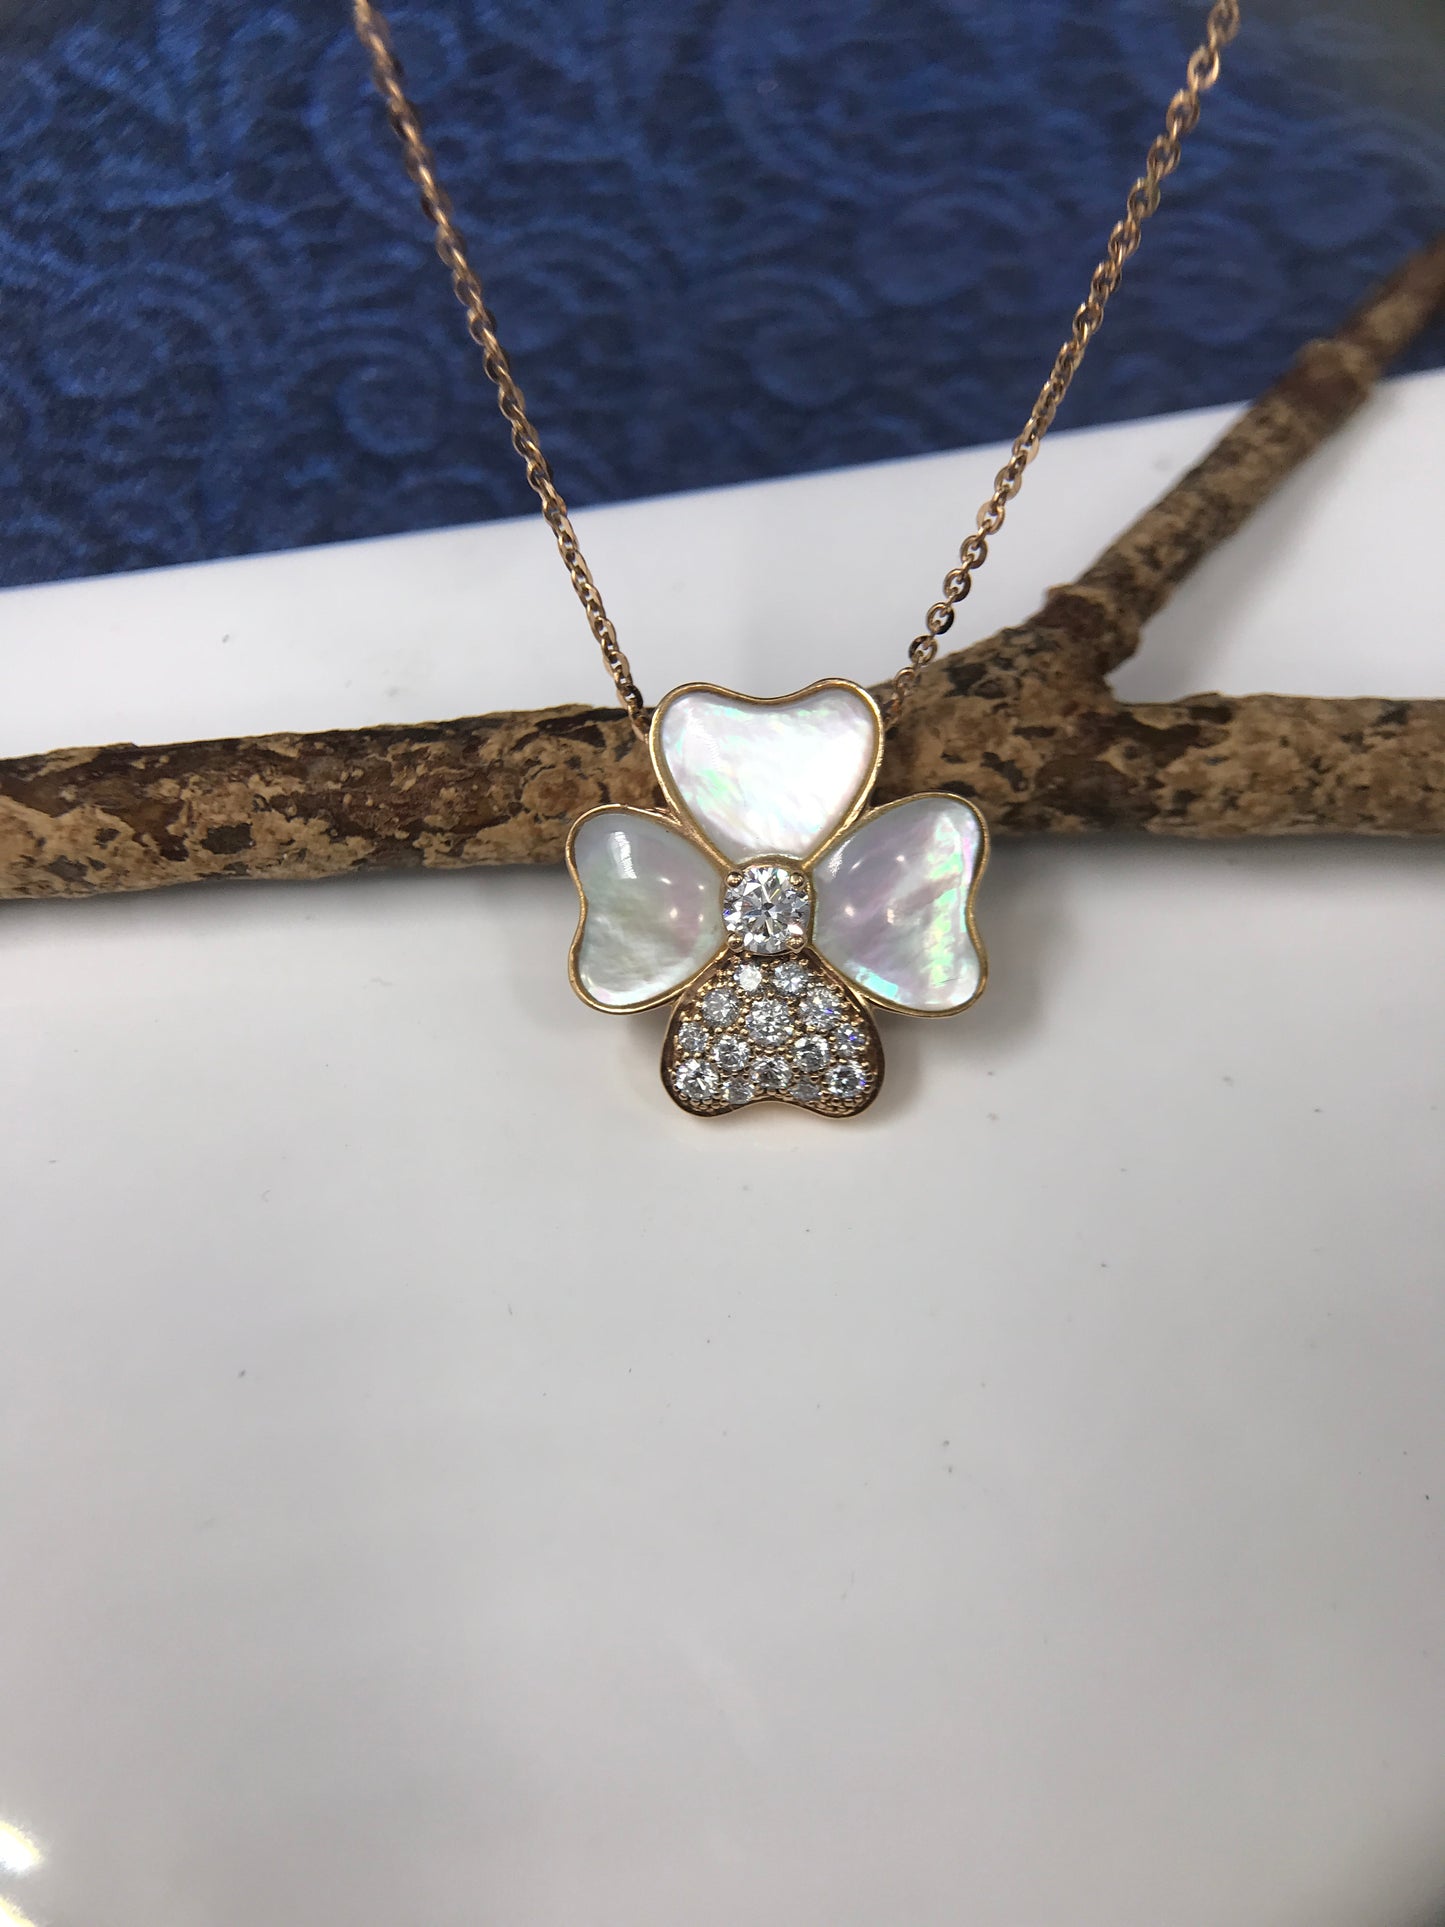 Four Leaf Clover Natural Diamond Pendant Lucky Charm 14k Gold Pendant For  Mother''s Day Gift at Rs 249890 | Varachha Road | Surat | ID: 2849892567962